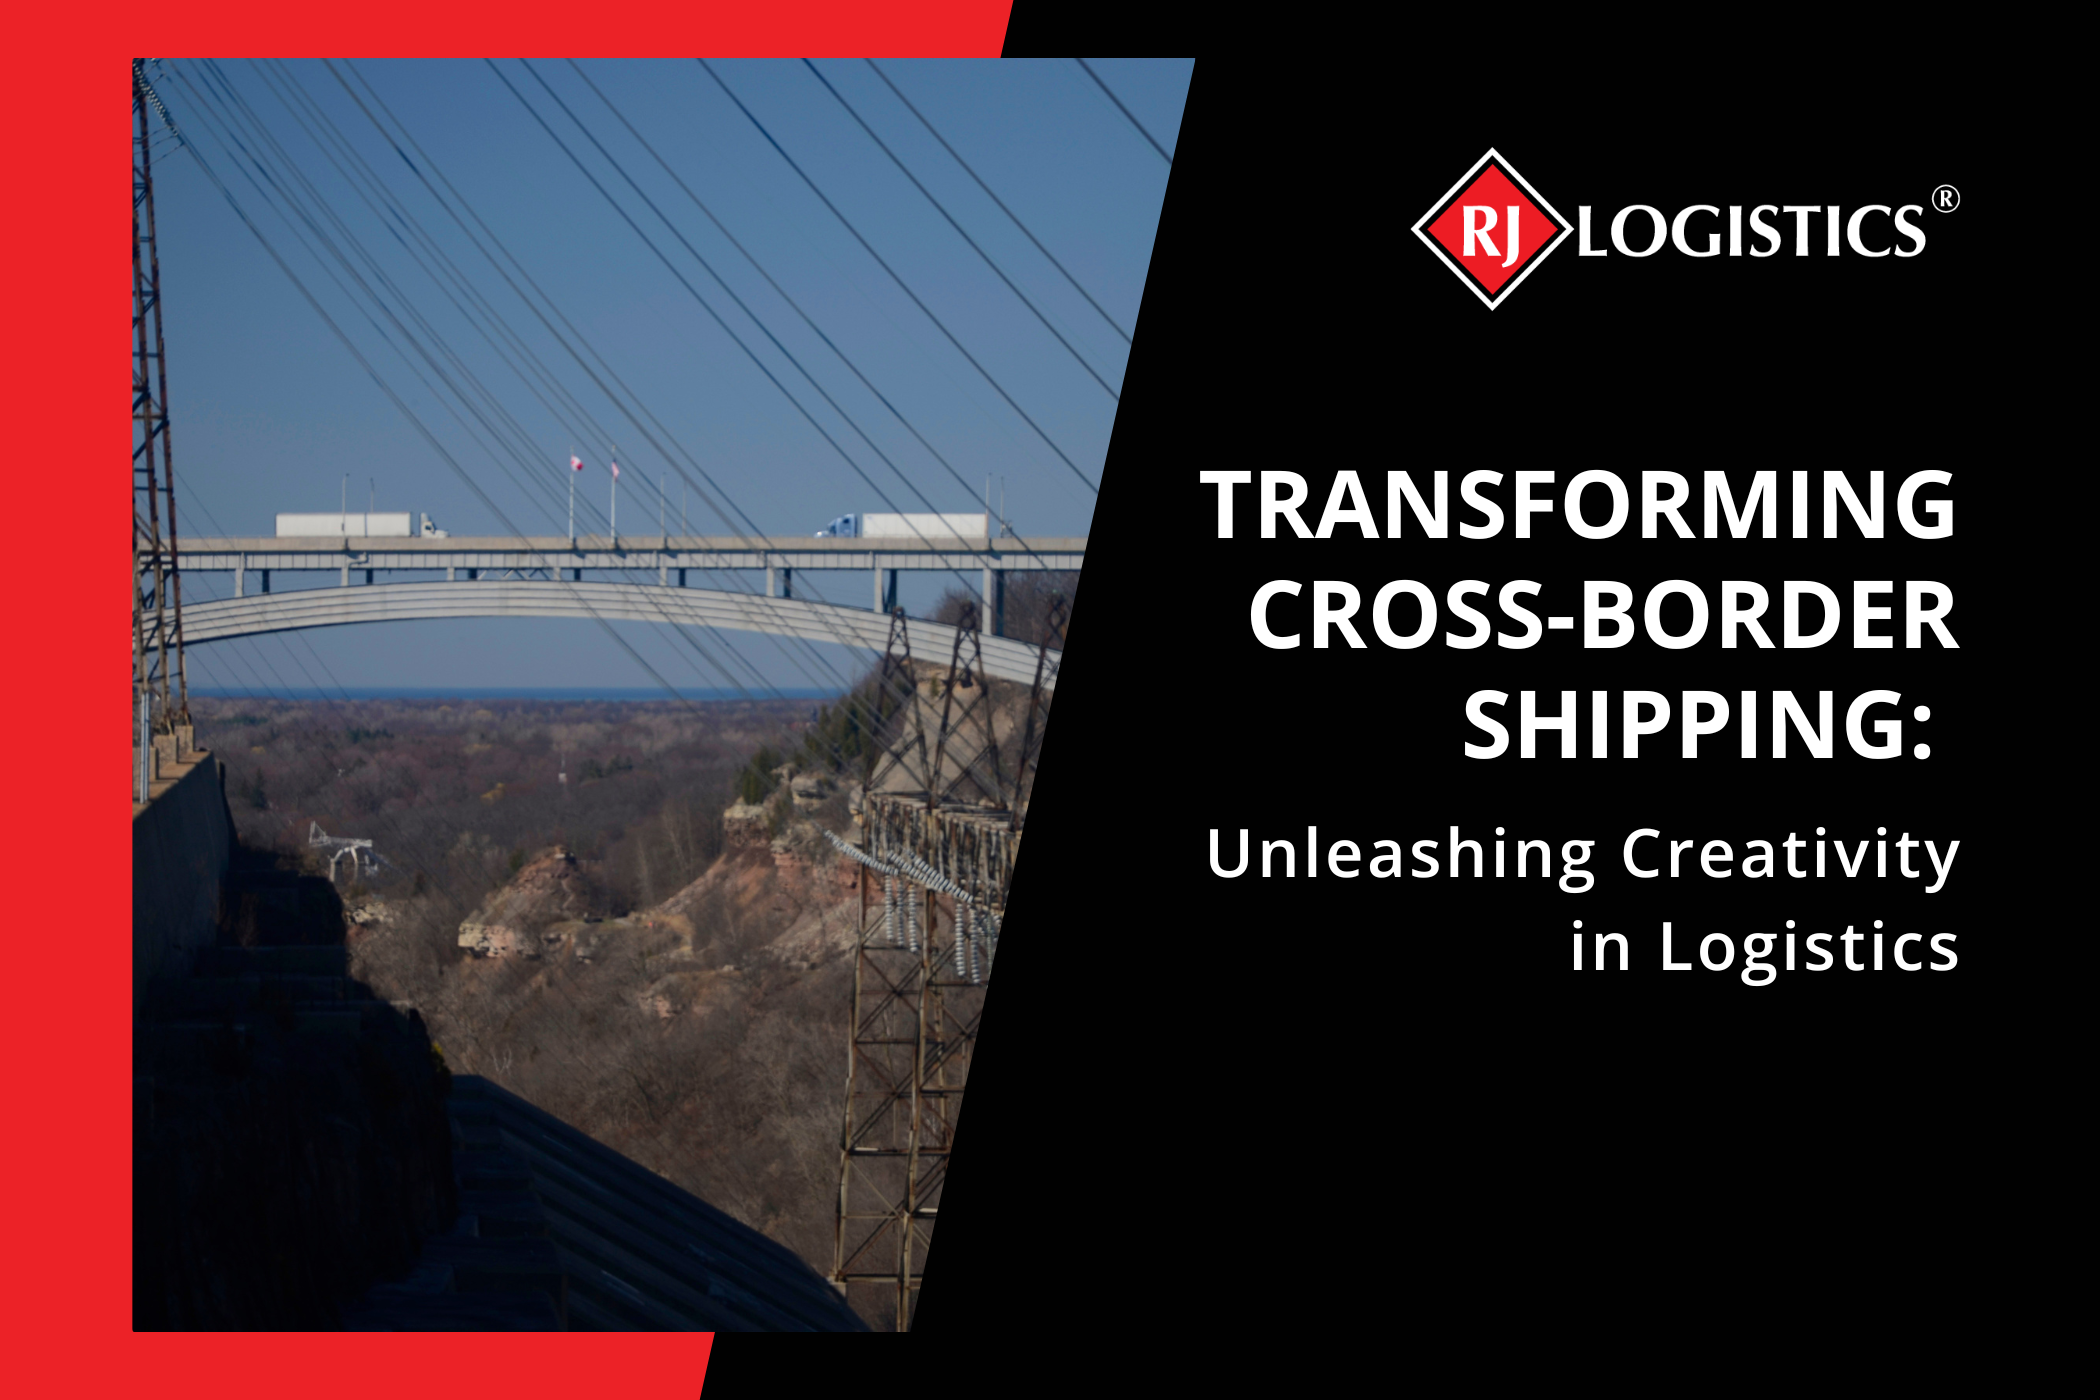 Transforming Cross-Border Shipping at RJ Logistics image of bridge over gorge with 2 white trucks crossing from afar.